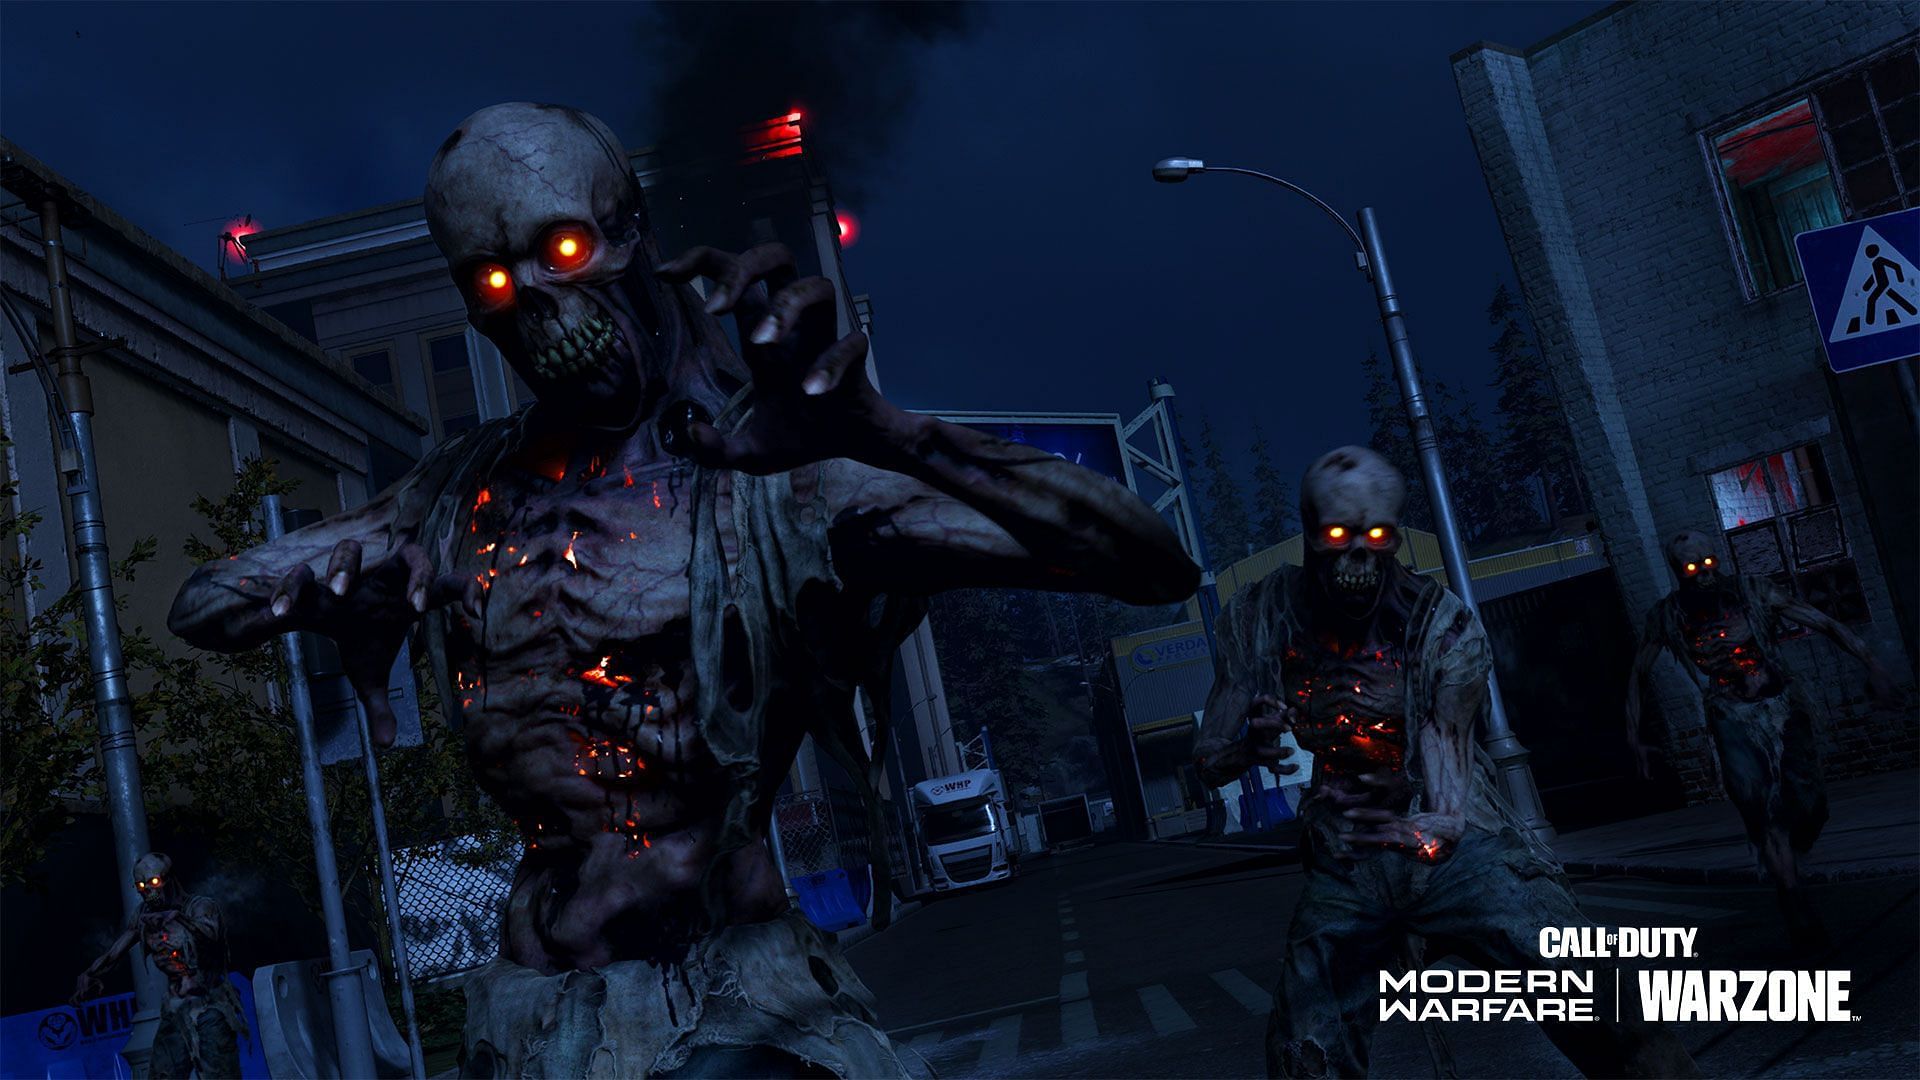 Zombies seemingly exist in the Modern Warfare universe (Image via Activision)